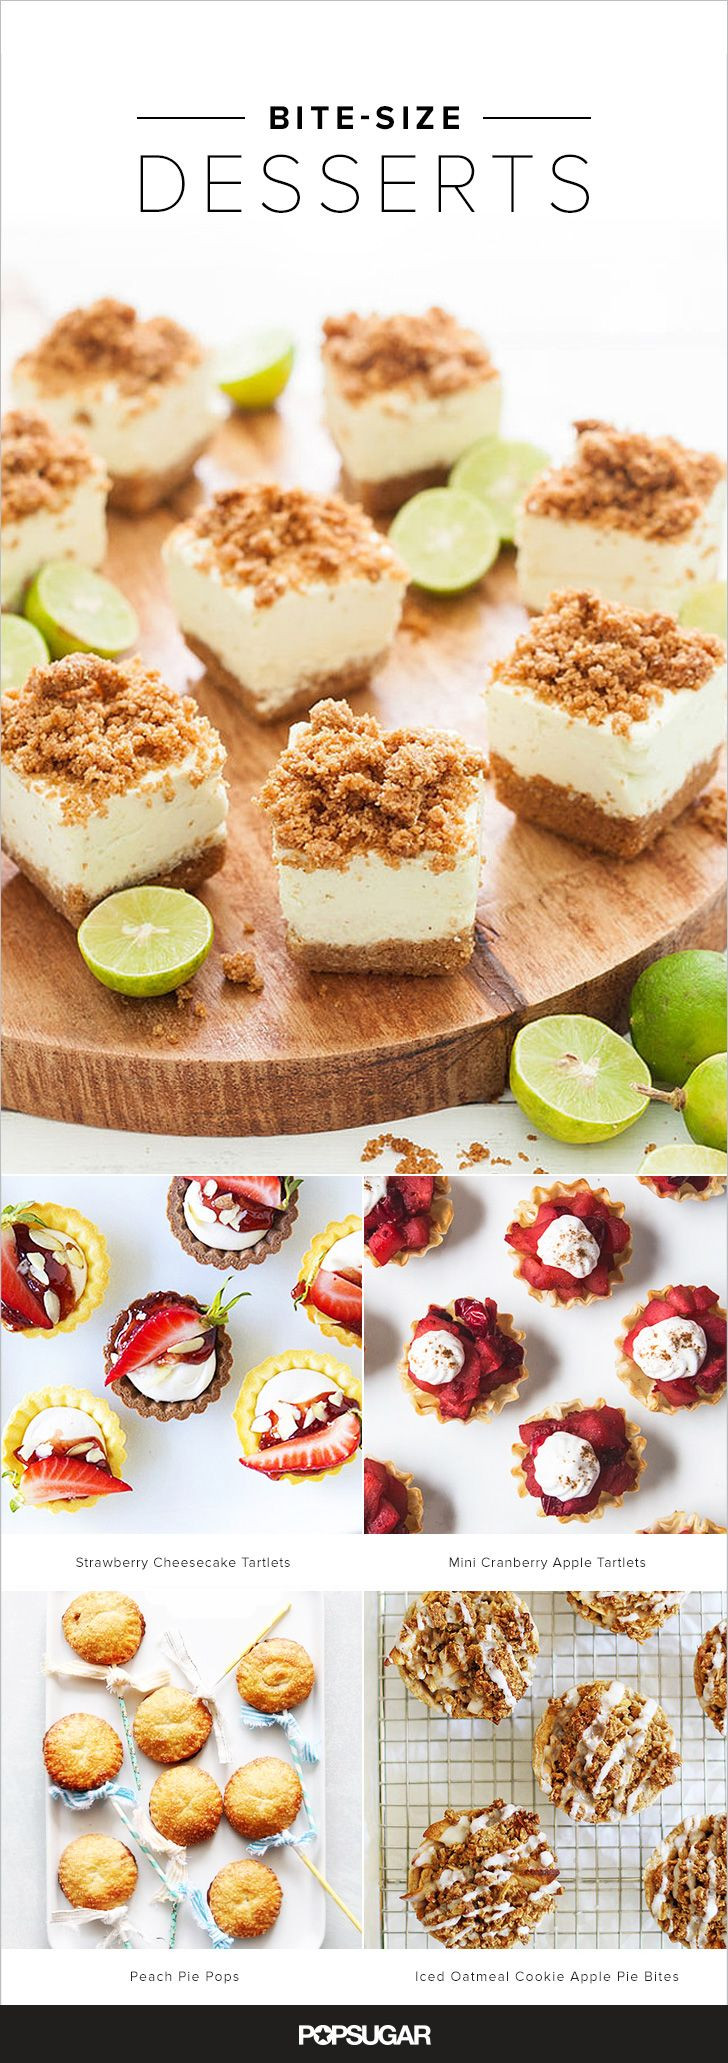 Mini Dessert Recipes For Parties
 The 25 best Party desserts ideas on Pinterest